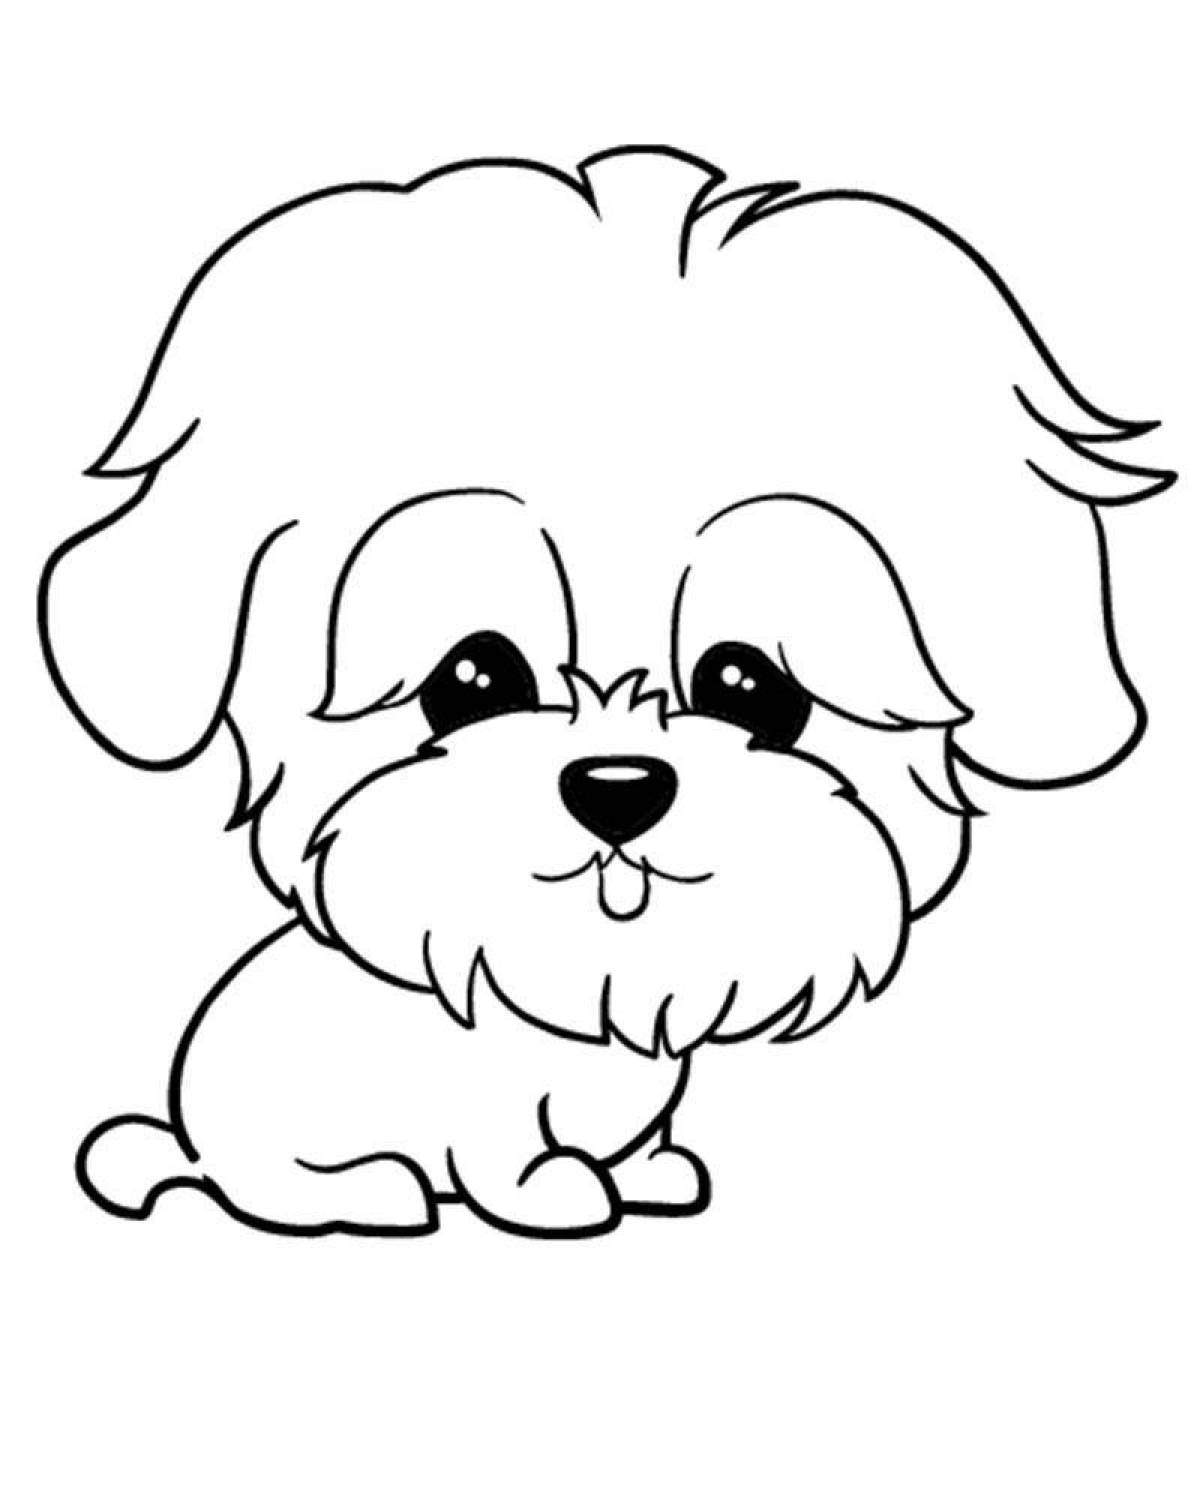 Shih tzu fluffy coloring page